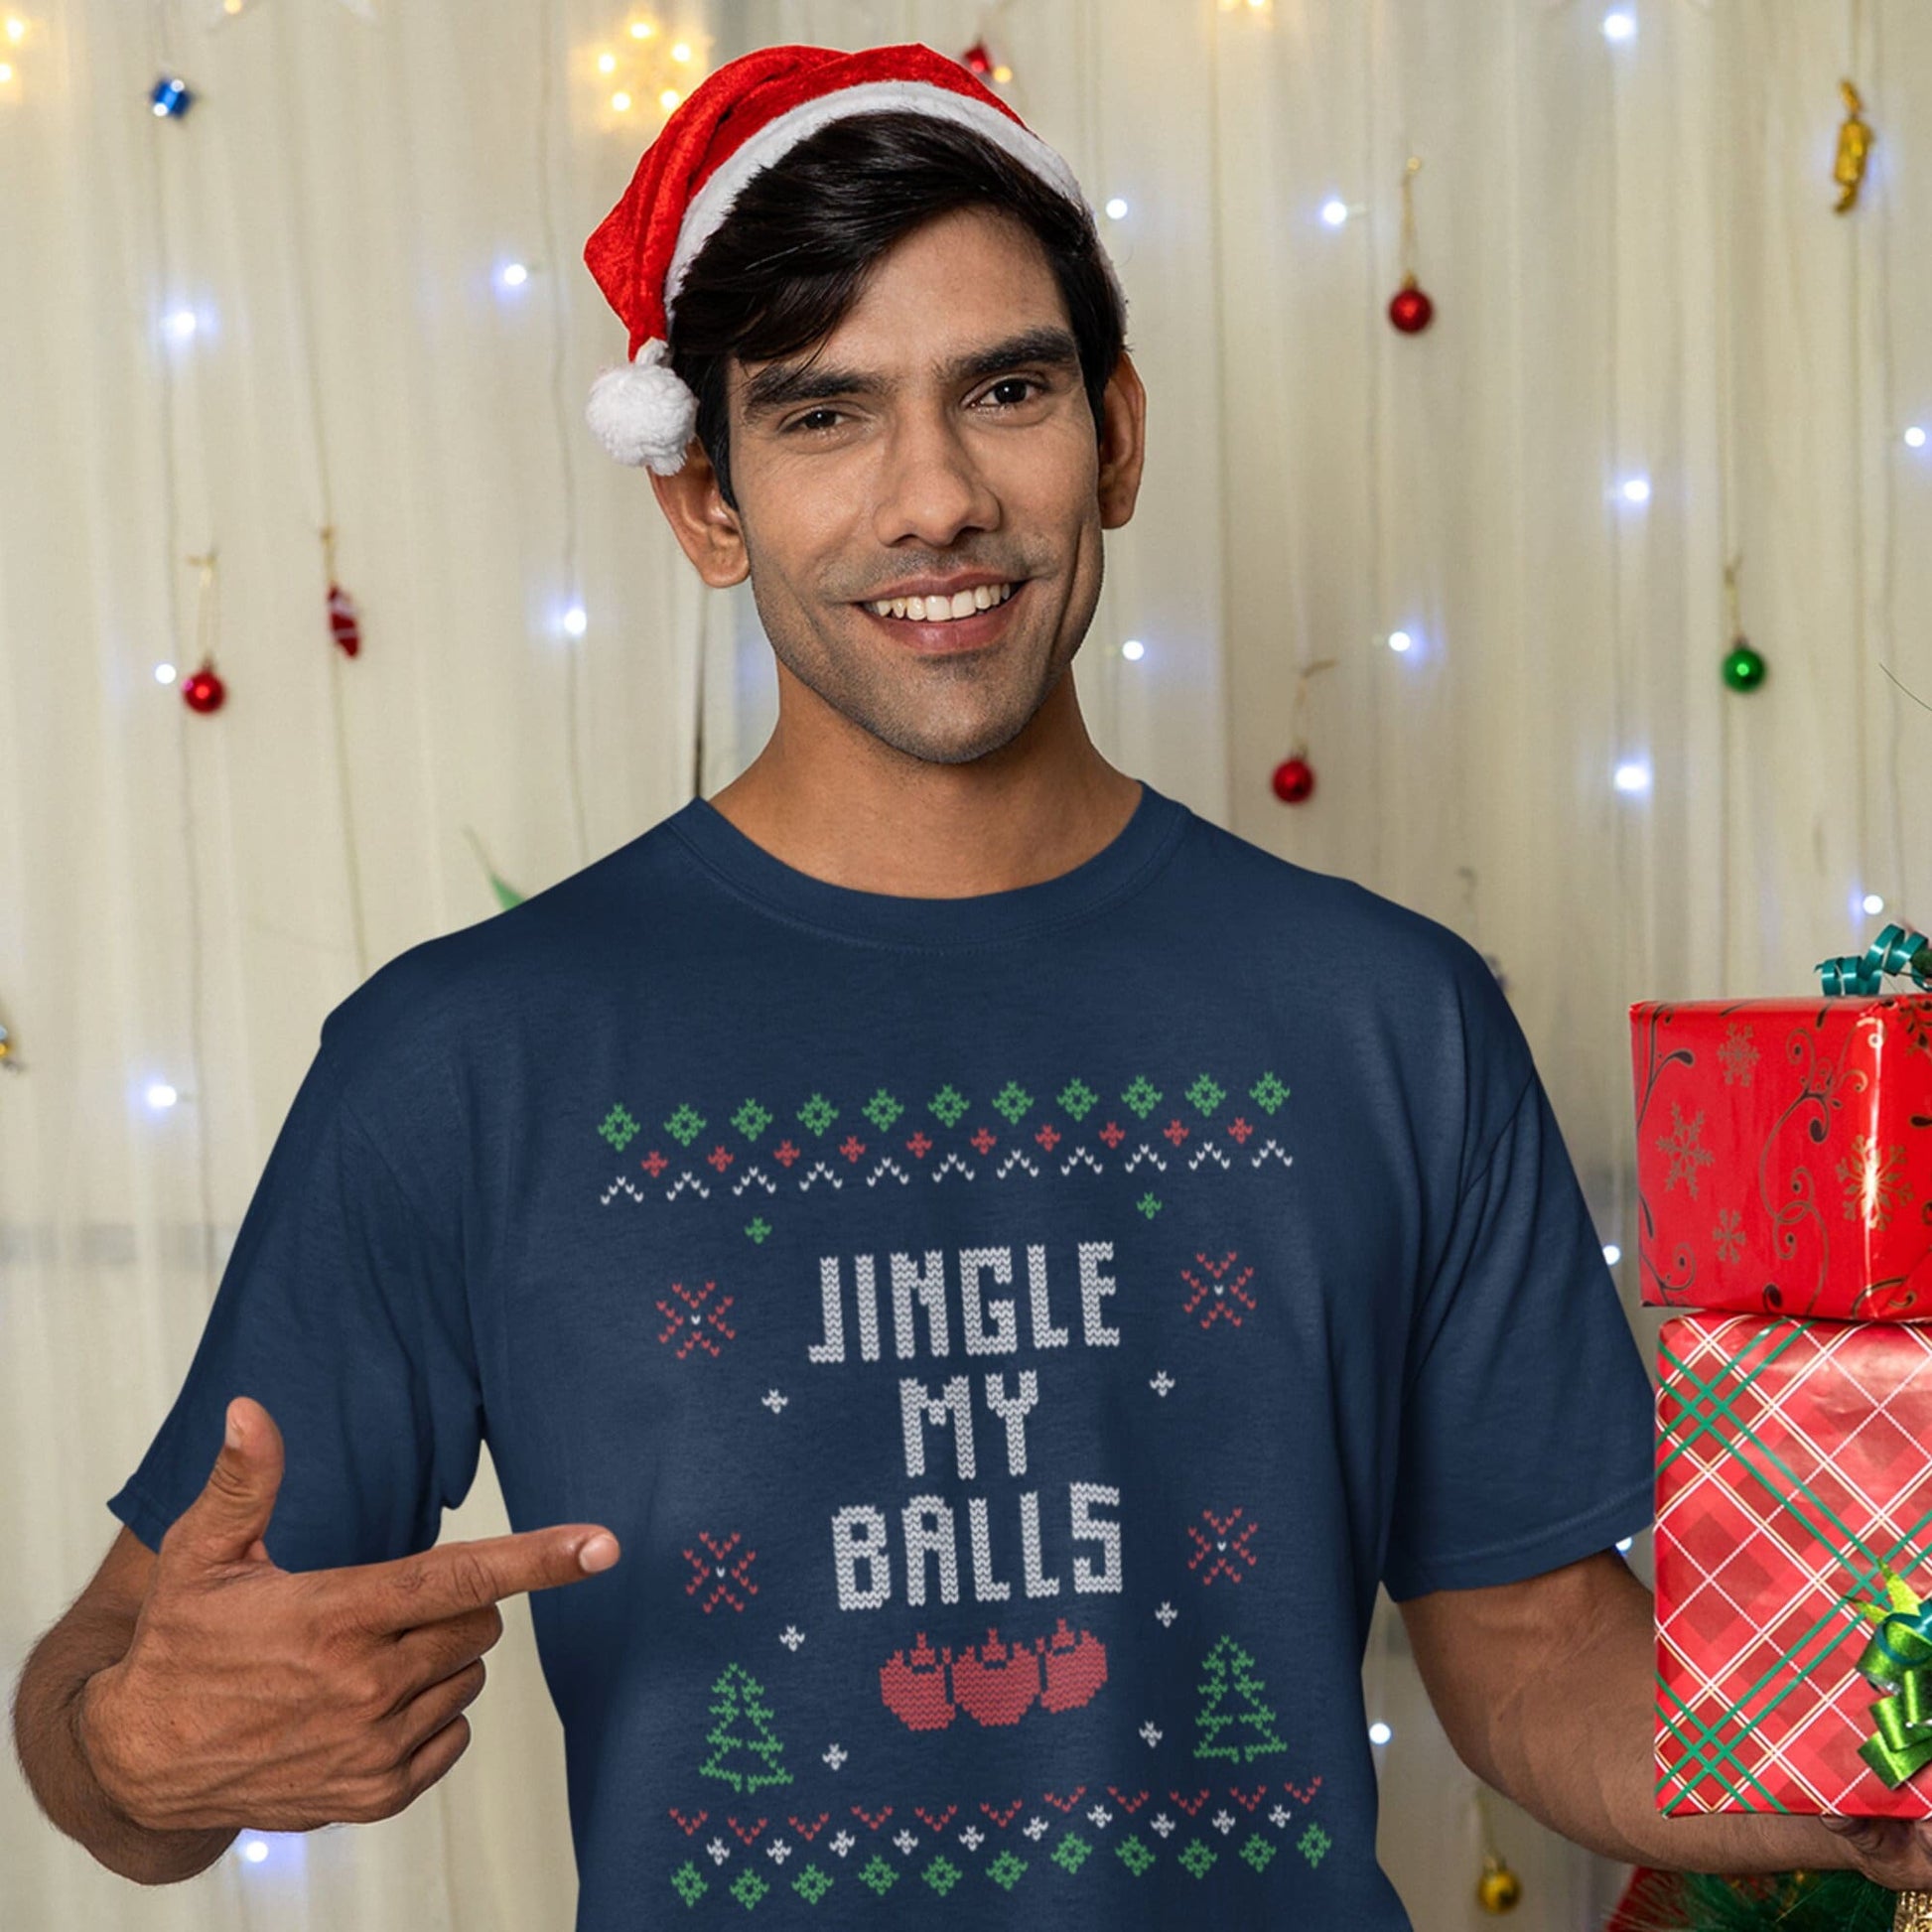 Ugly Christmas Sweater T Shirt Jingle my Balls Inappropriate work party shirt for him, Funny Ugly Christmas Sweater for guys - SBS T Shop